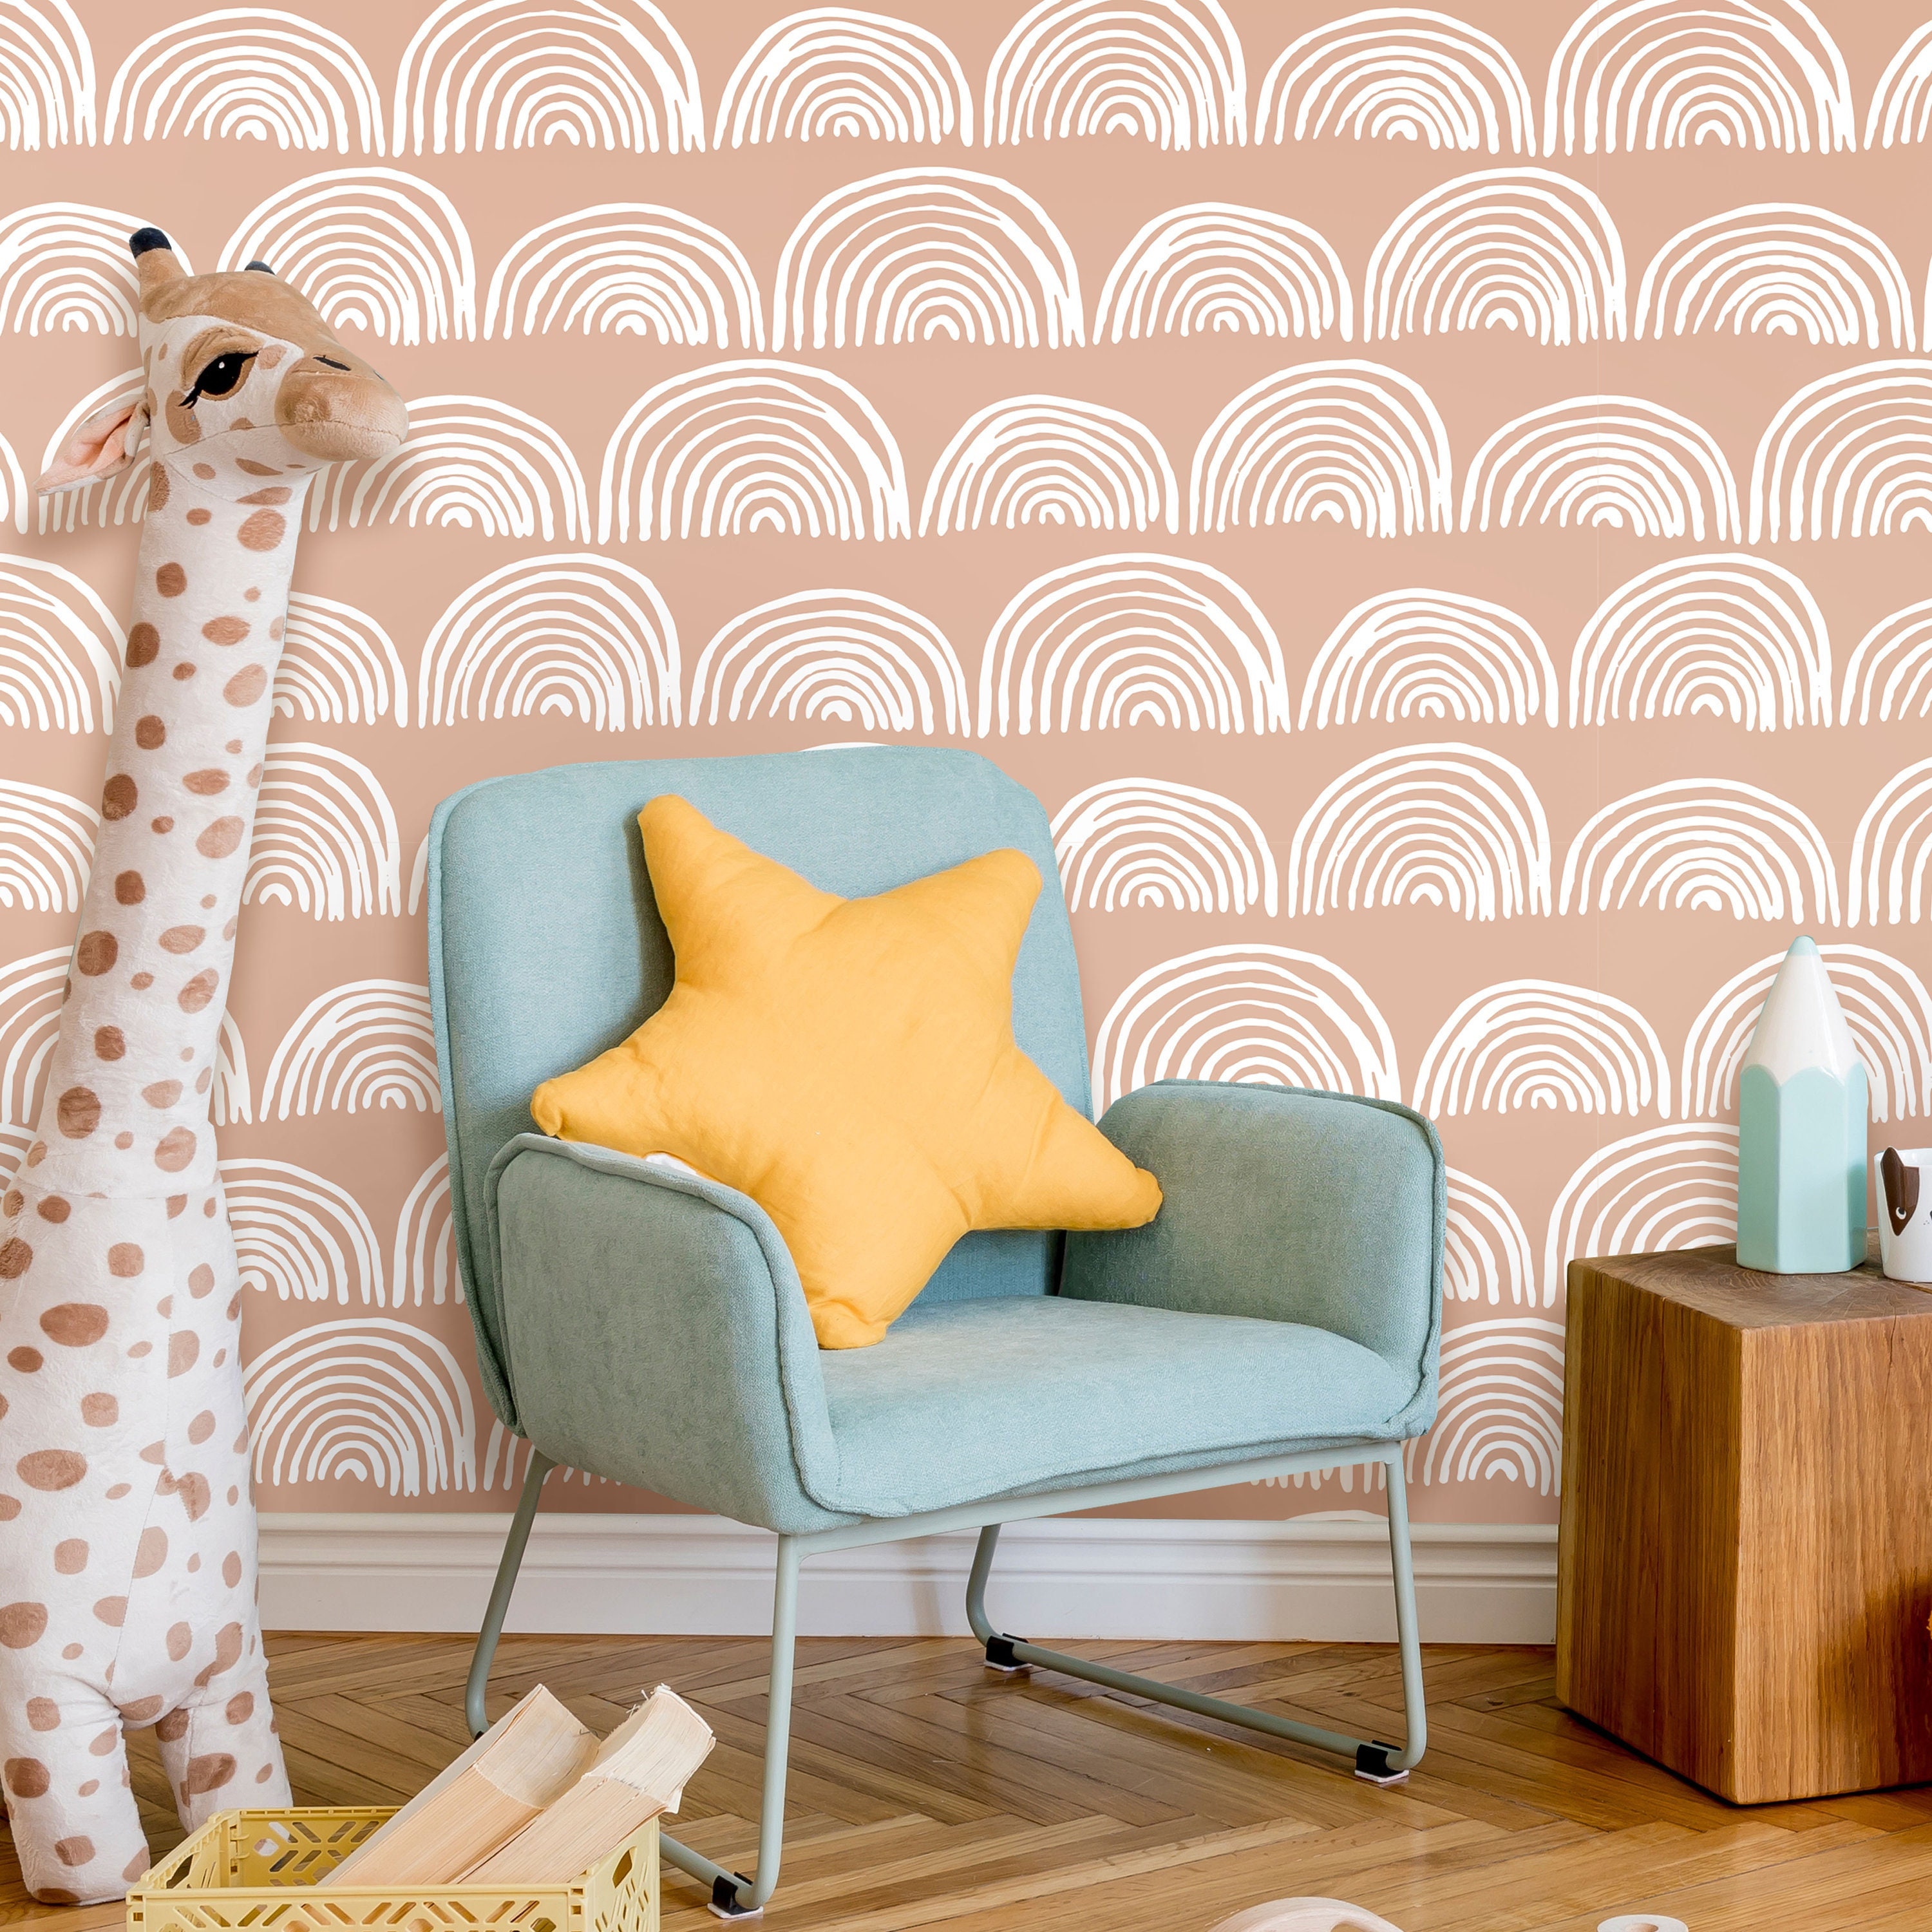 Colorful Geometric Wallpaper Livening up a Childrens Playroom   GeoHomeStyle